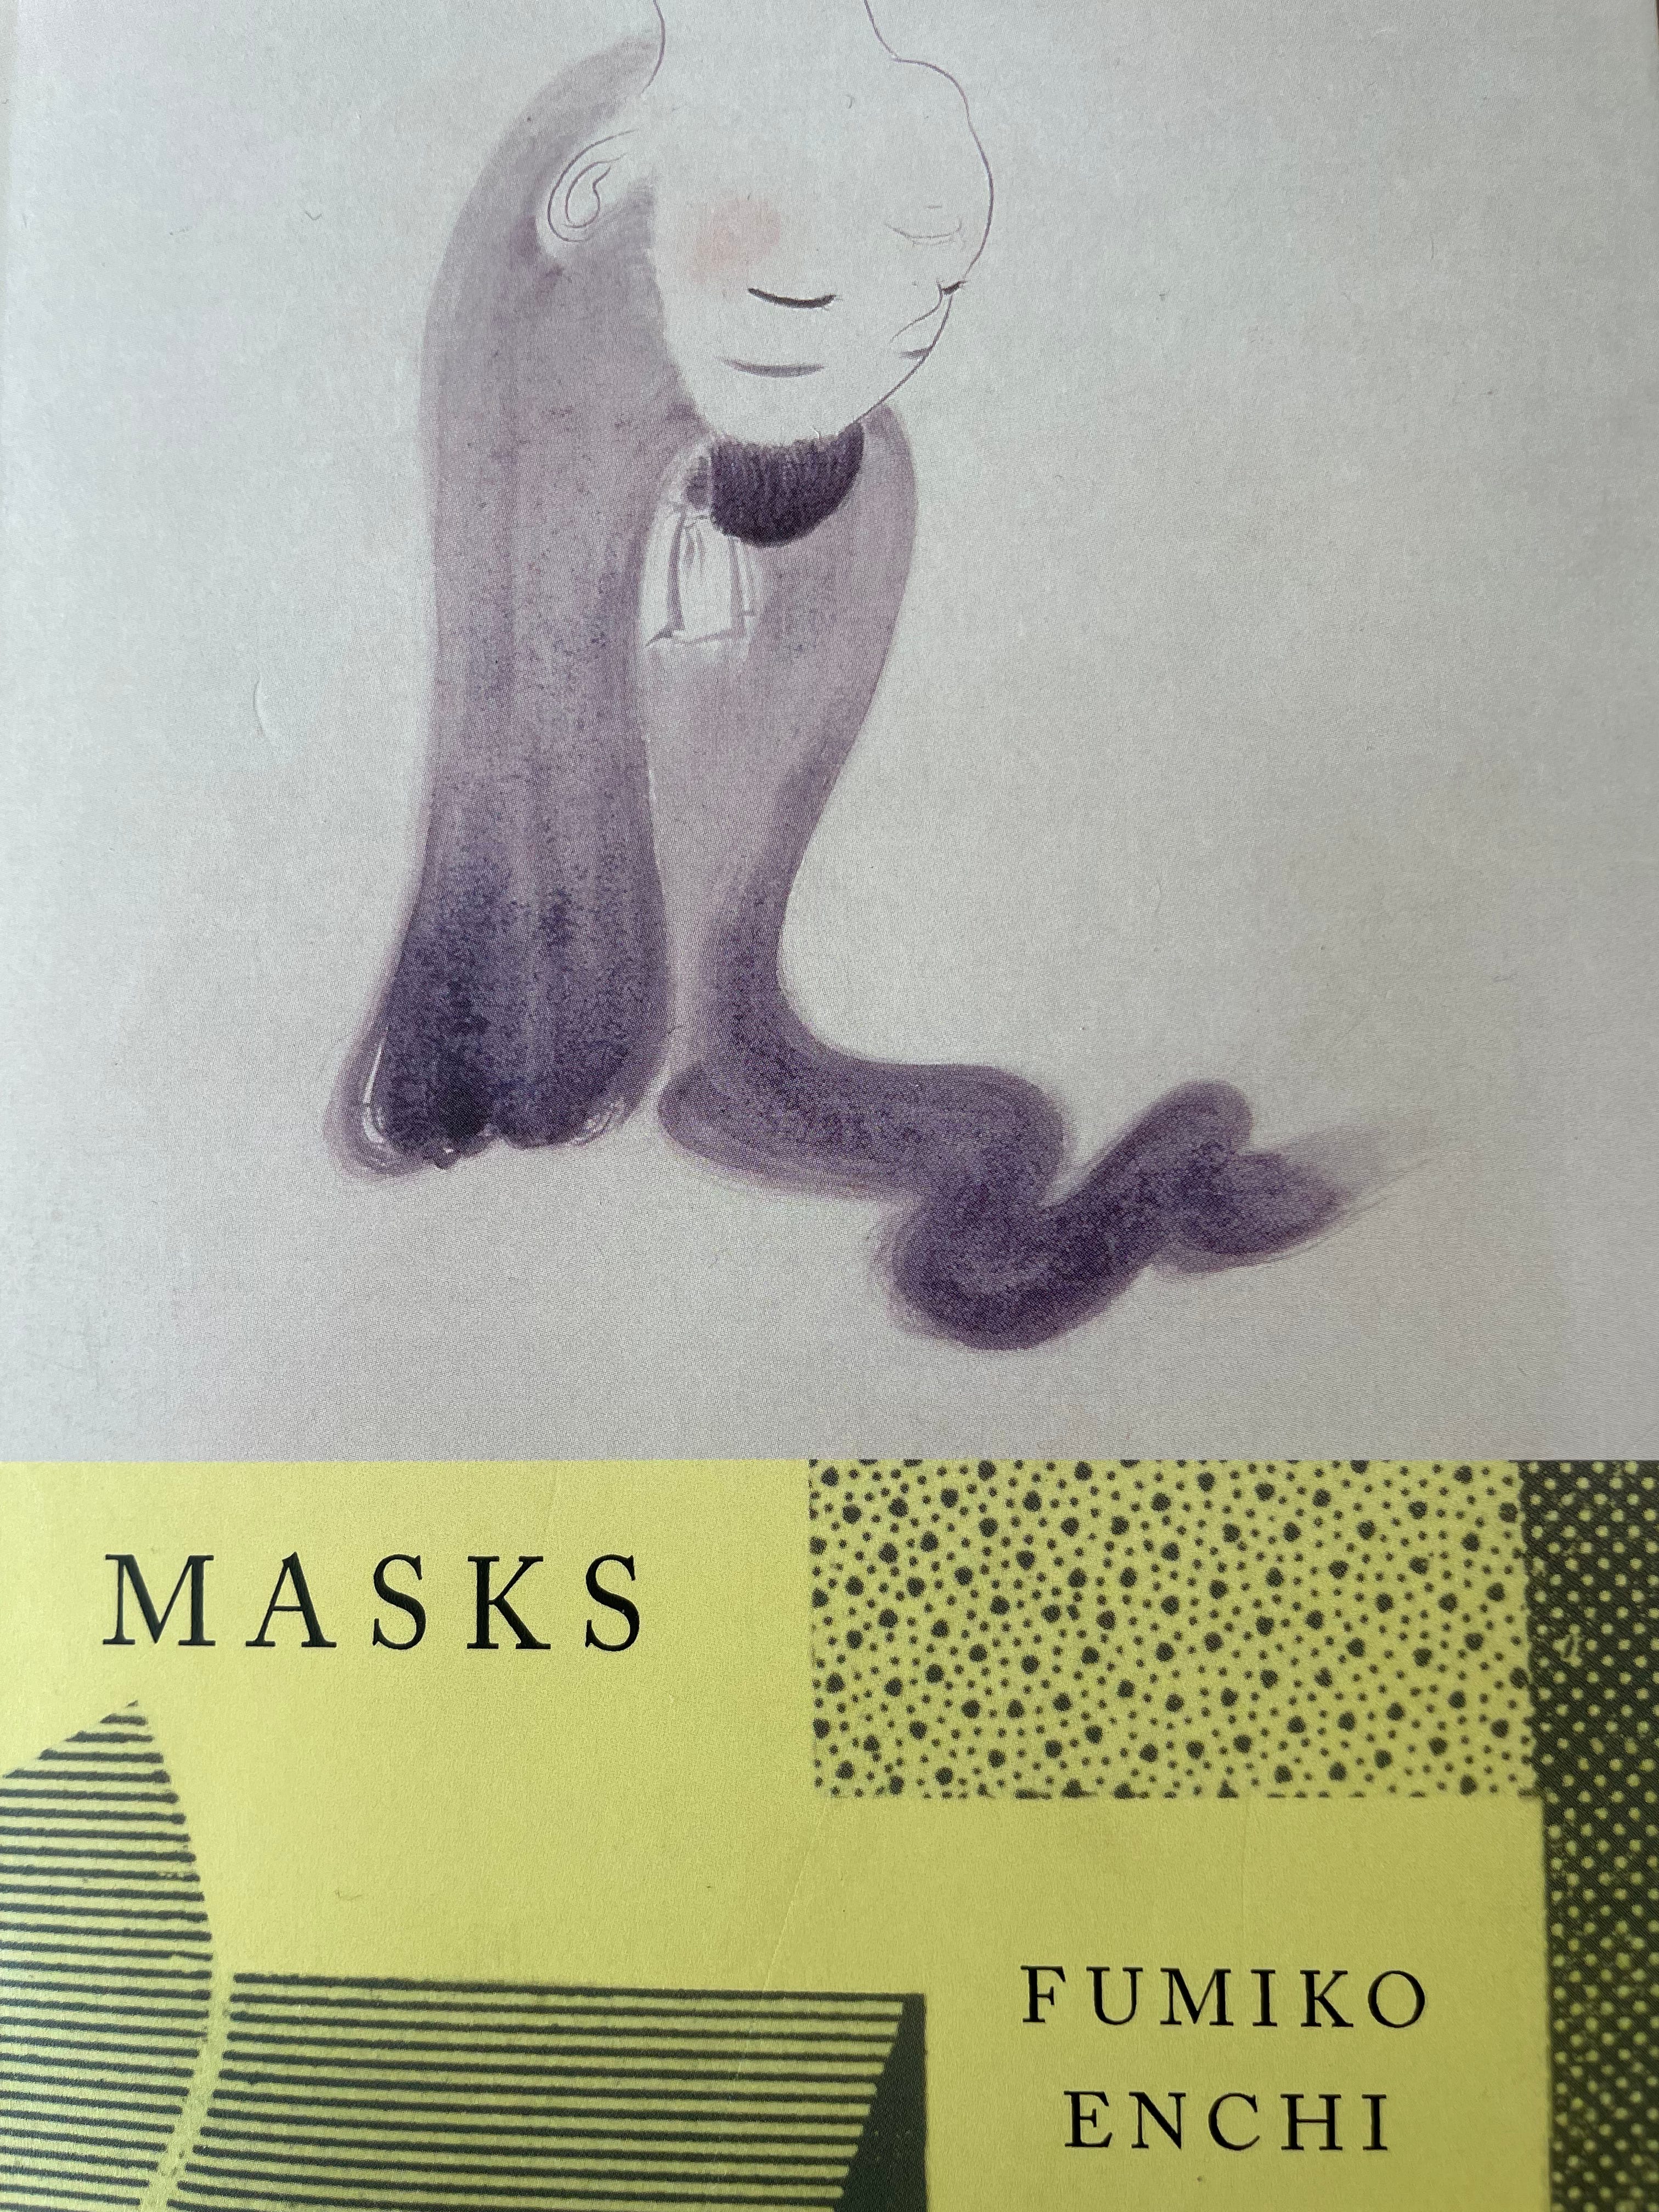 THE MASKS WEAR - by Mohan